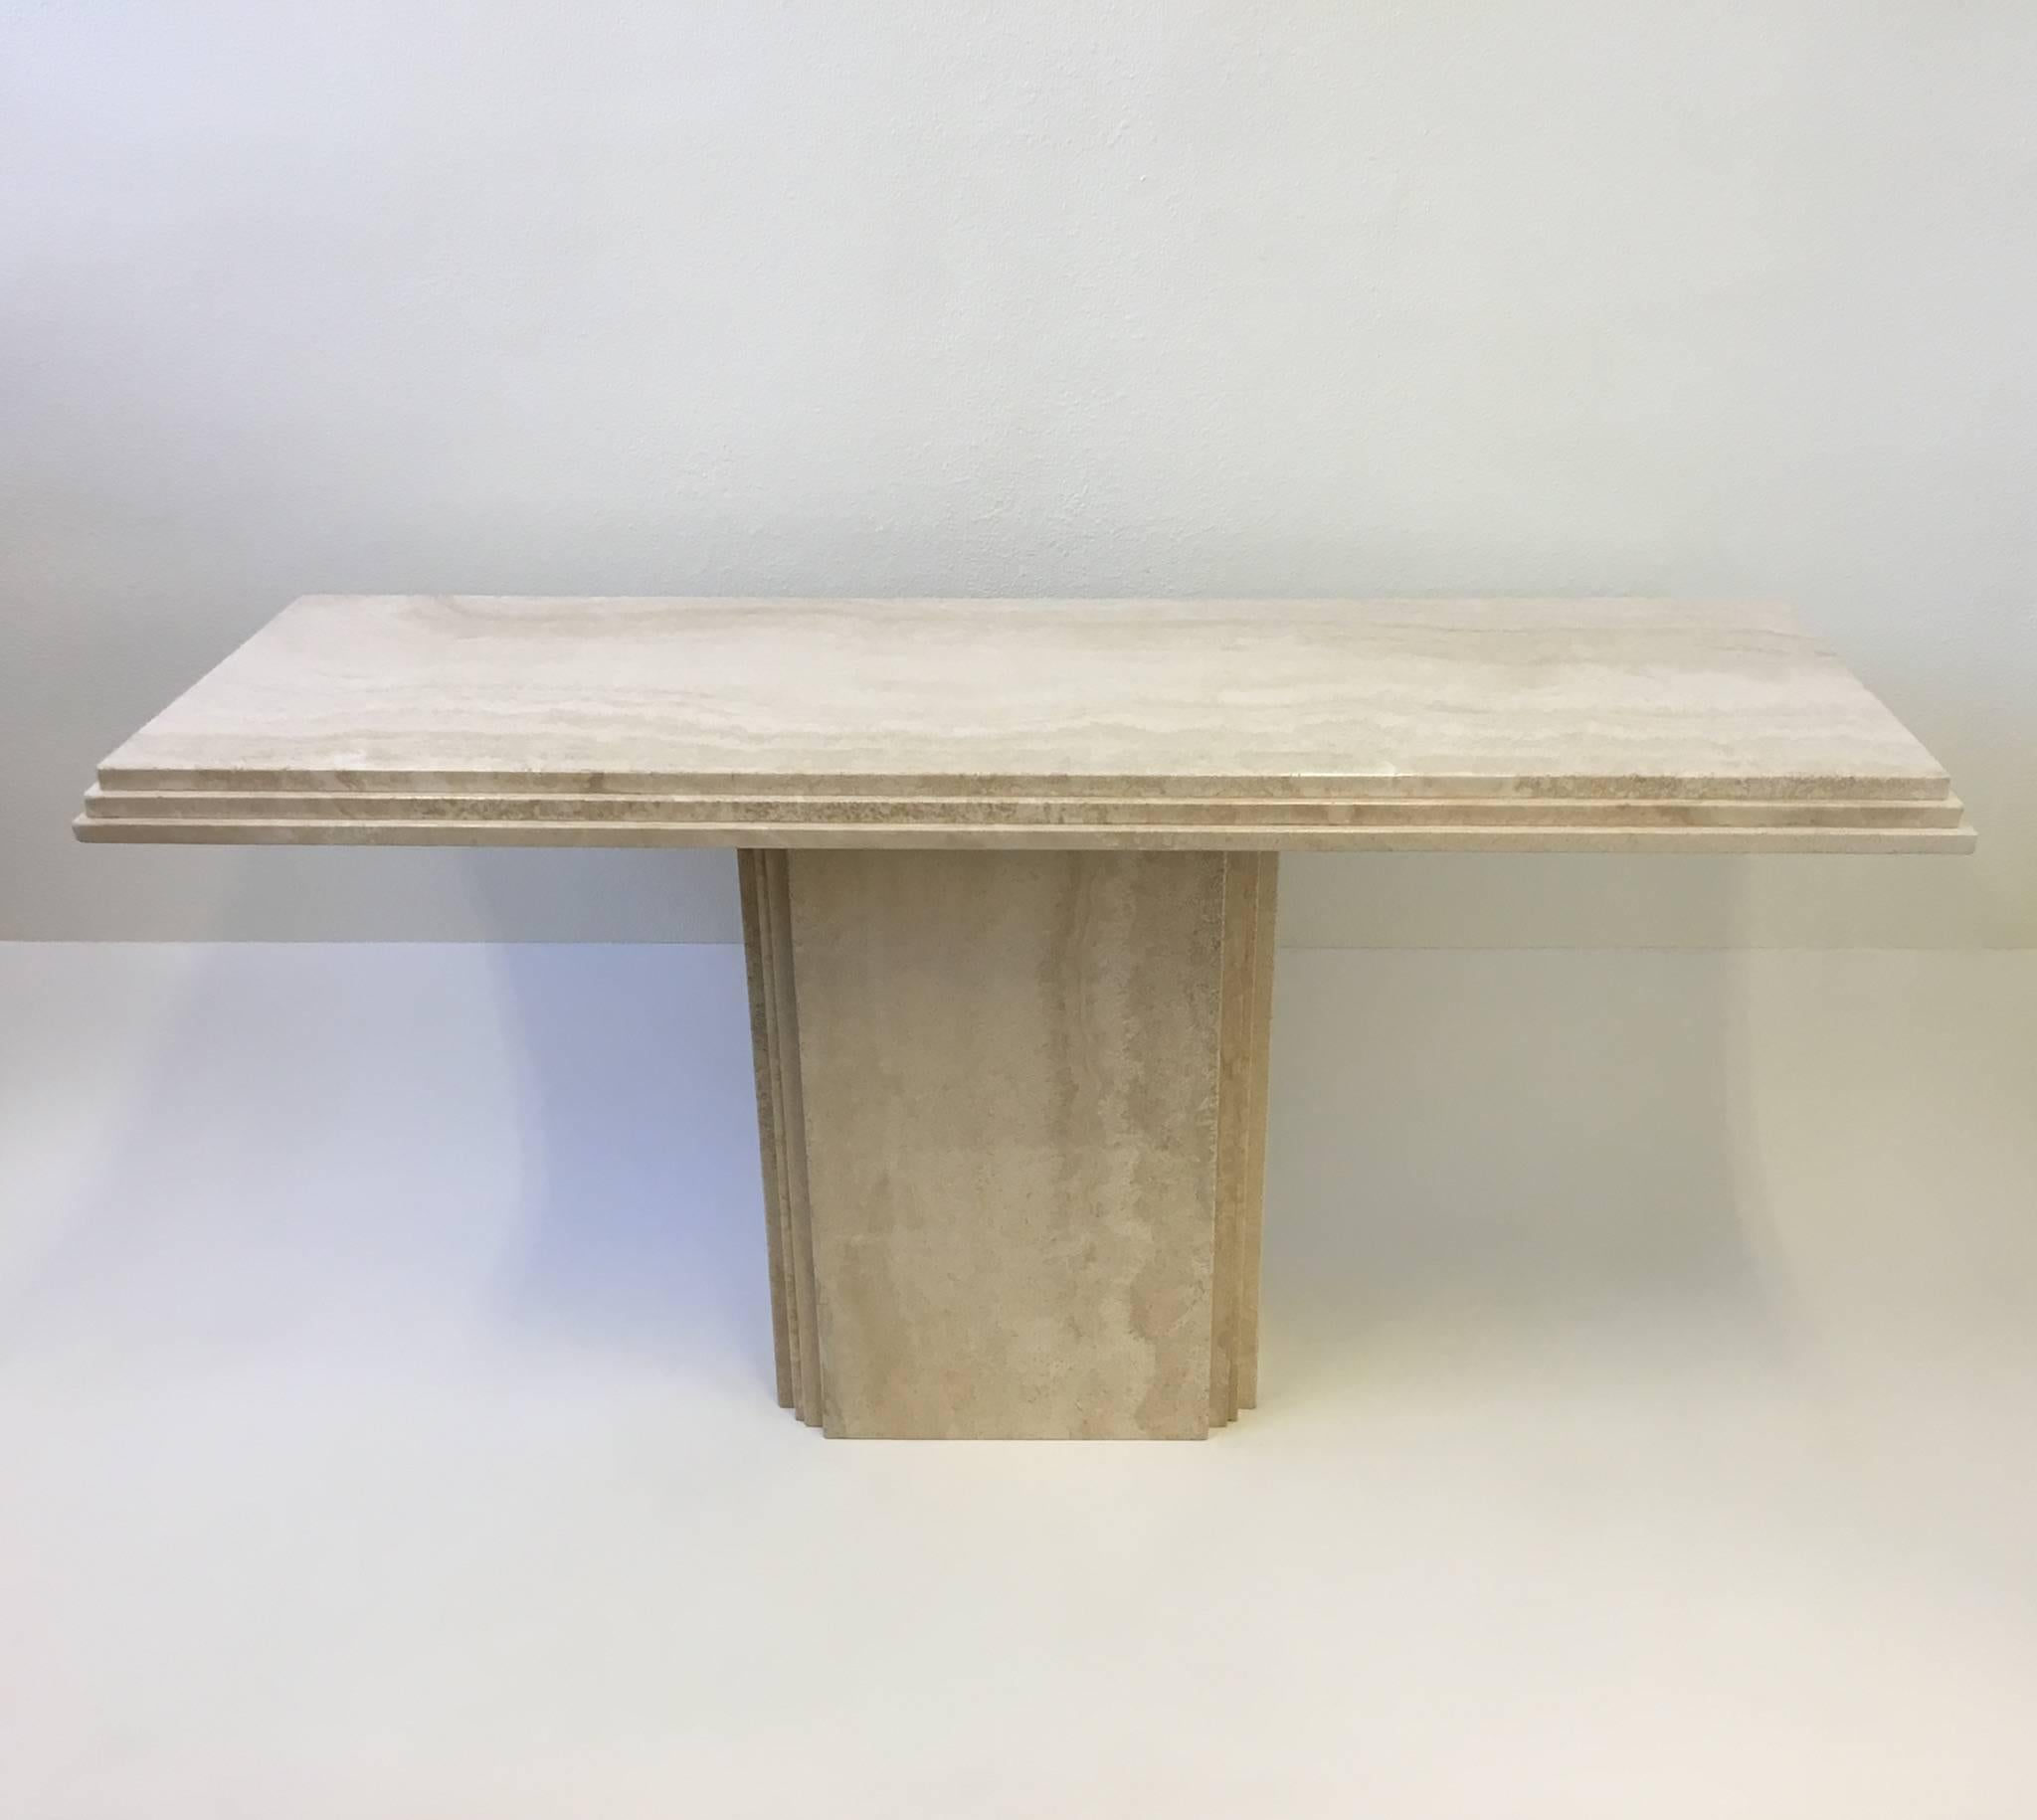 A amazing Italian travertine console table from the 1970s
The table is in two sections. Newly professionally polished.
Dimension: 59.25 inches wide 19.75 inches deep 29.5 inches high.